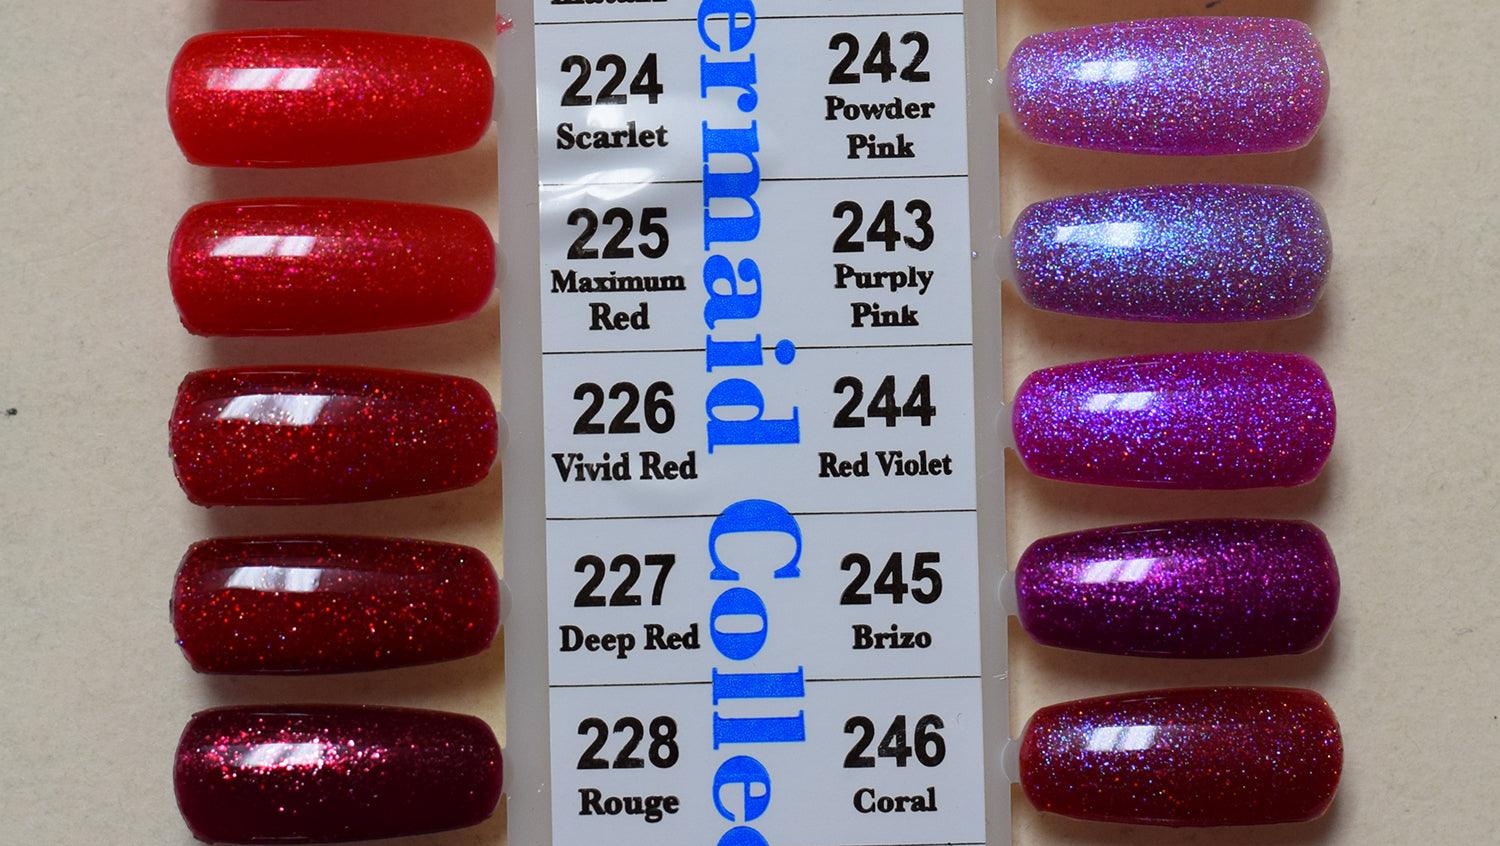 DND DC MERMAID Collection #244 Red Violet